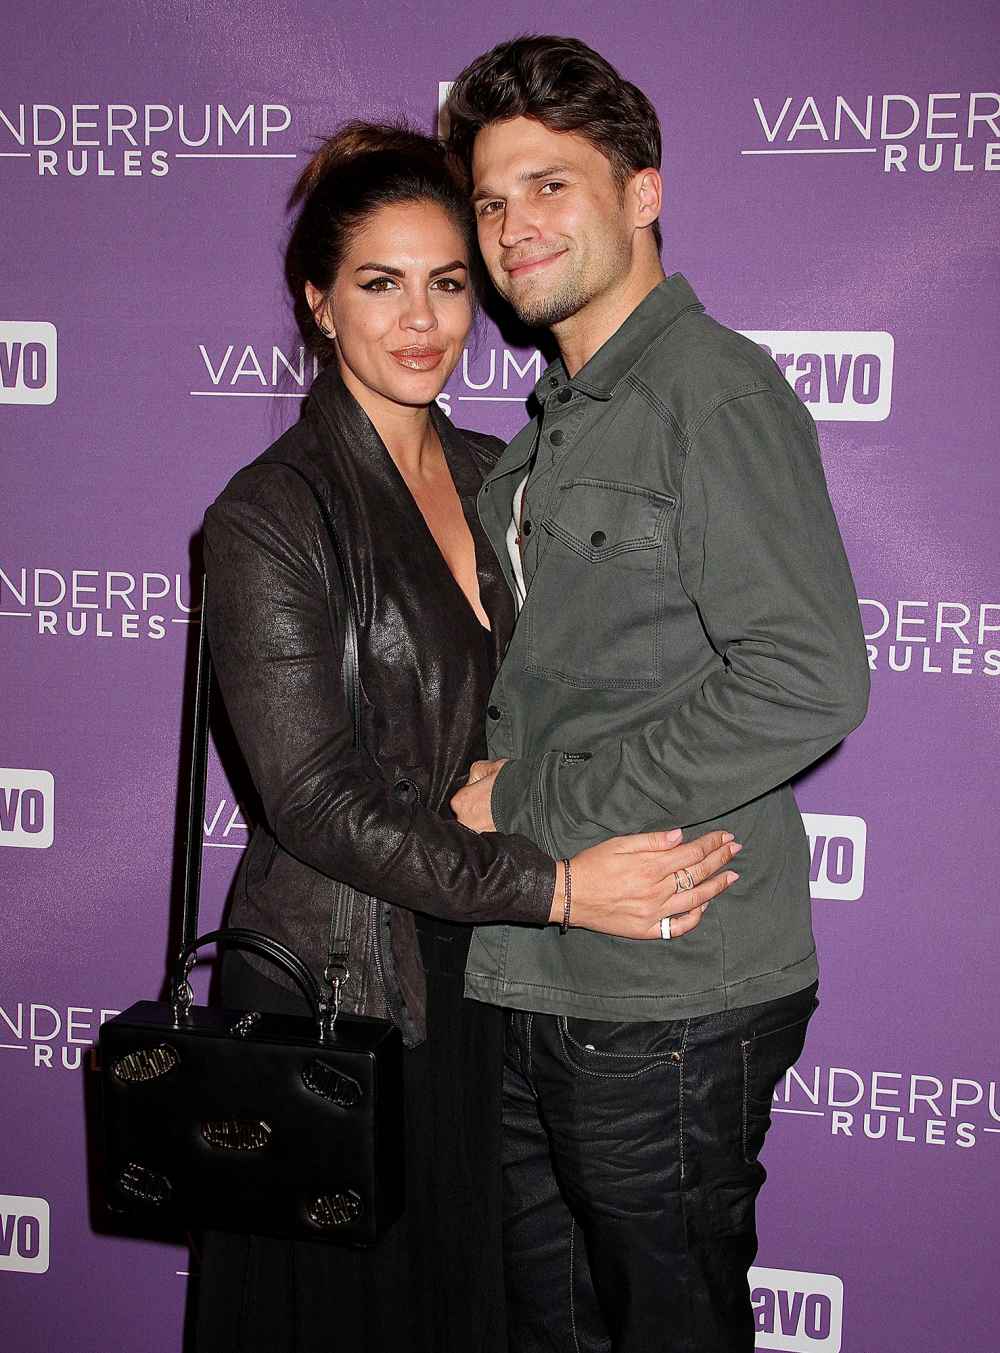 Vanderpump Rules Stars Katie Maloney and Tom Schwartz Split After More Than 10 Years Together 03